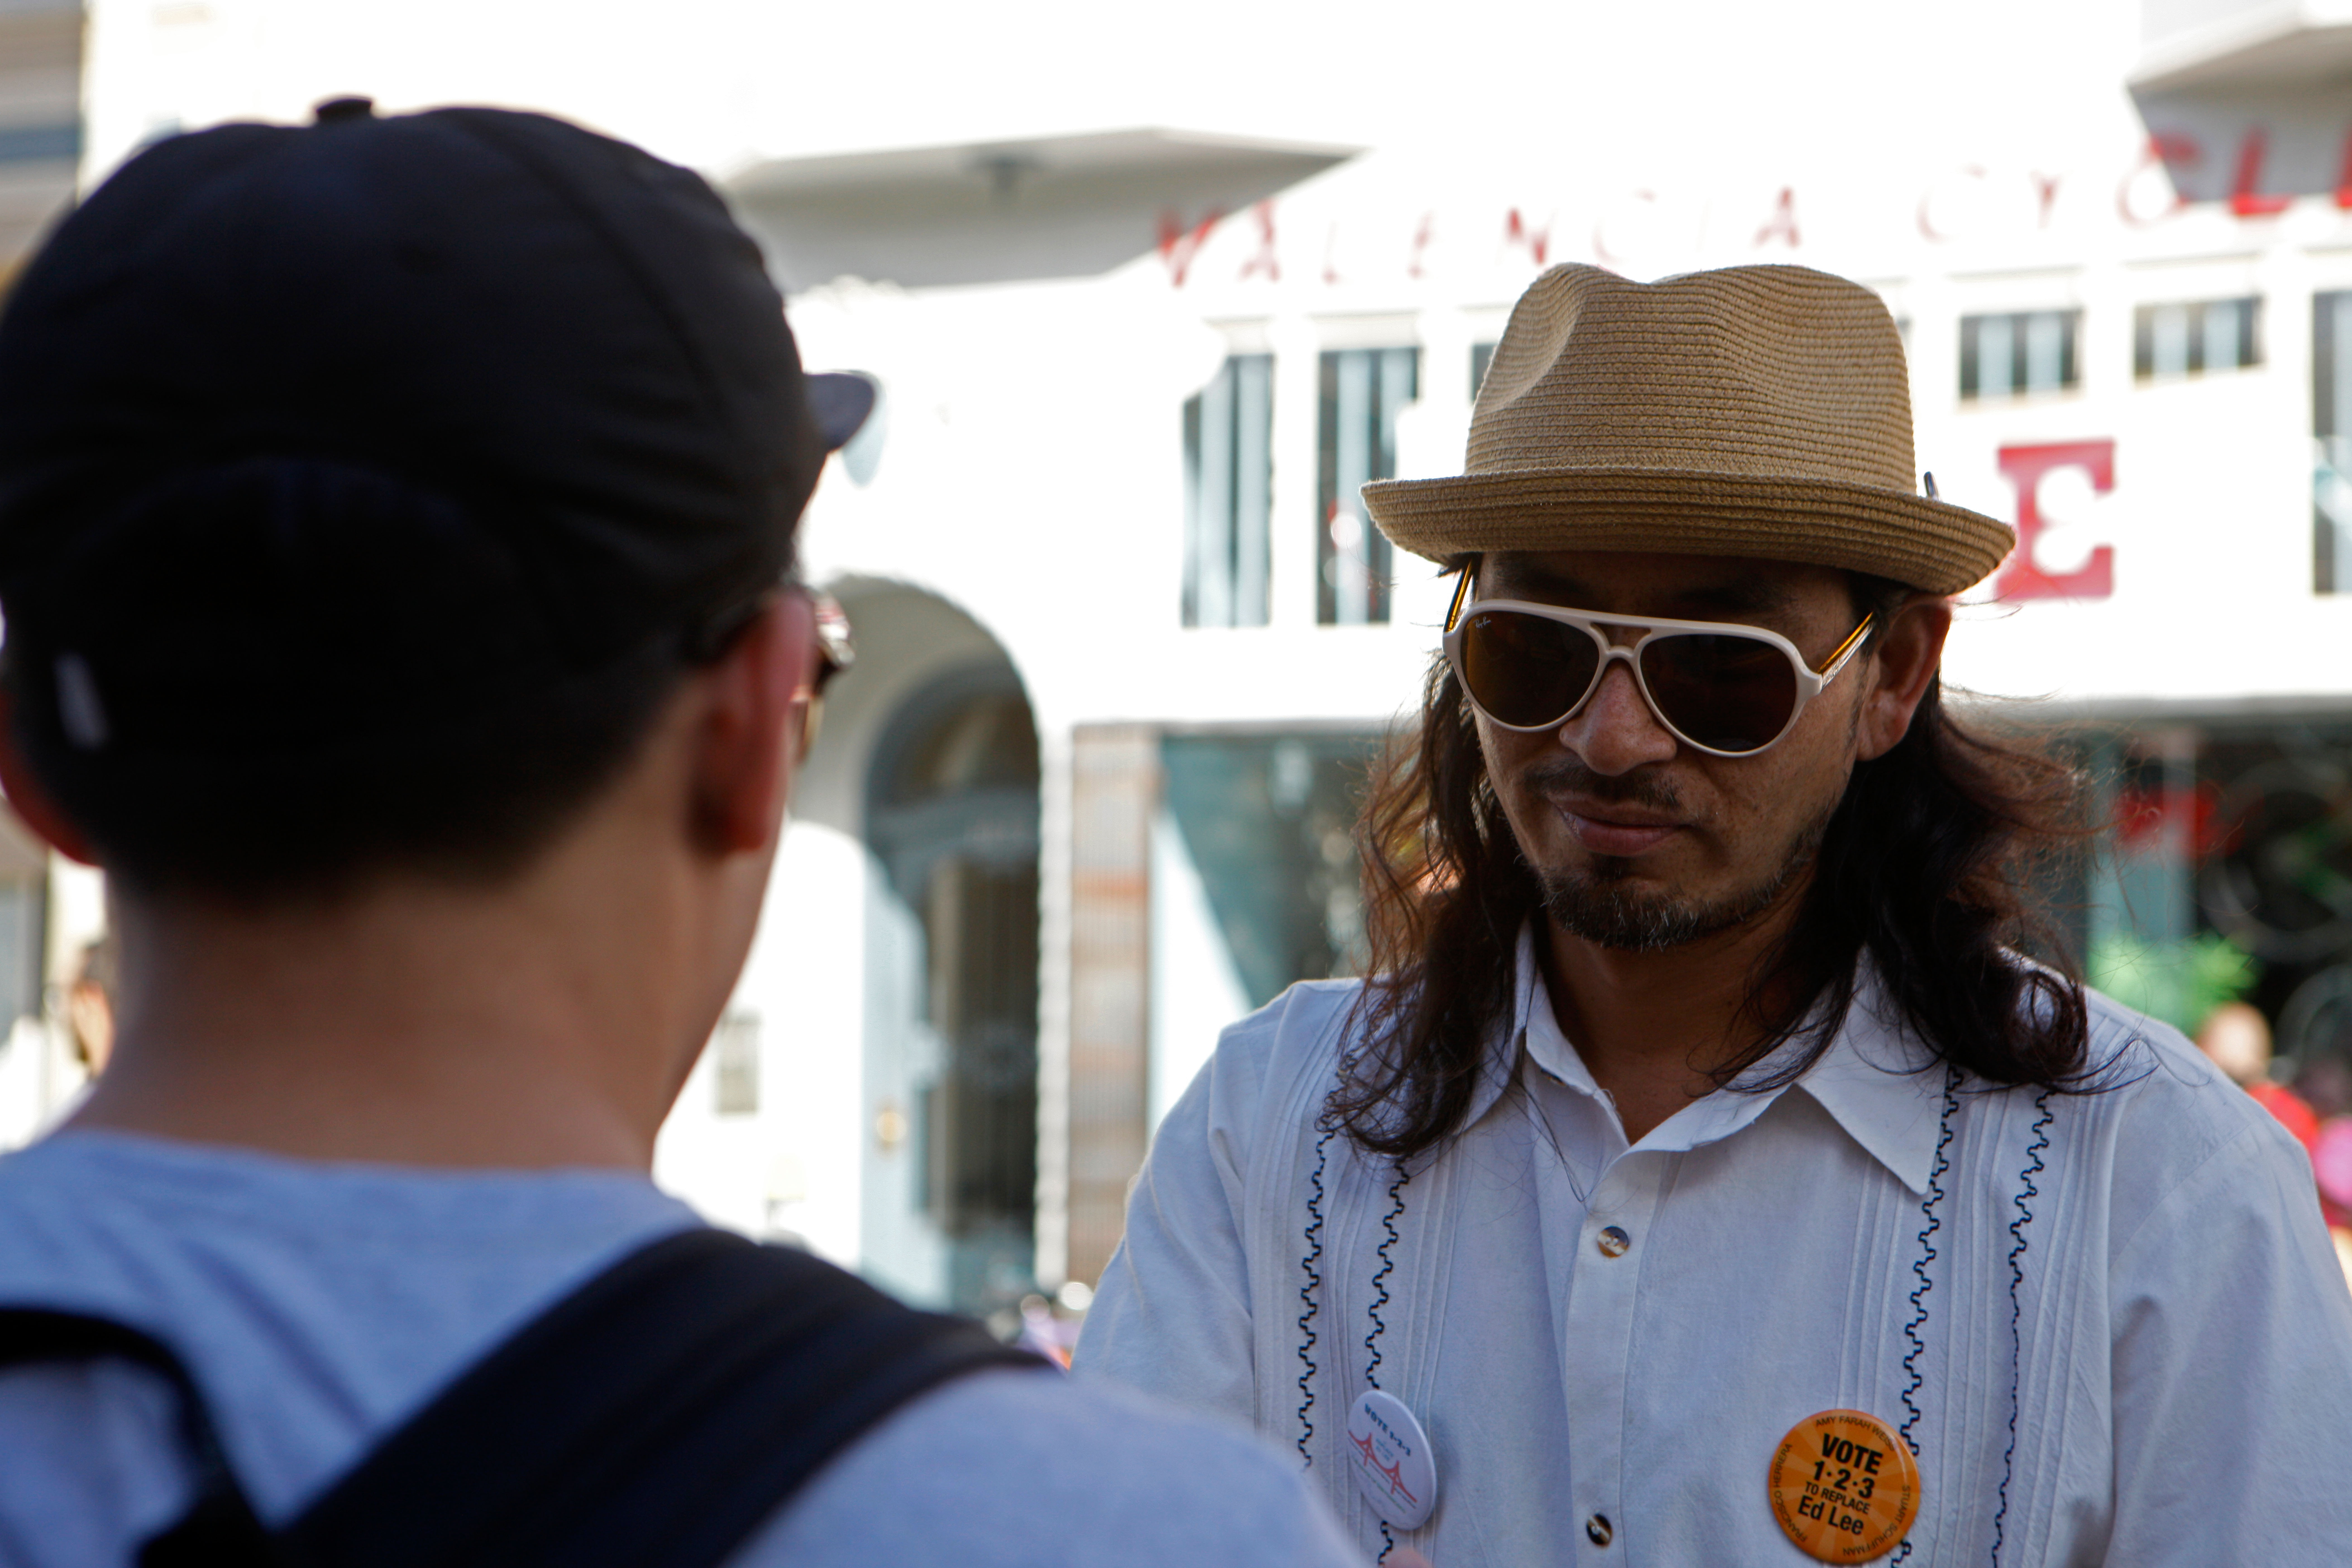 Local rapper and former City College student Equipto hands out information and talks to people about the "Vote 1-2-3 To Replace Ed Lee" campaign during Sunday Streets on Valencia Street on Sunday, Oct. 18, 2015. (Photo by Franchon Smith/The Guardsman)